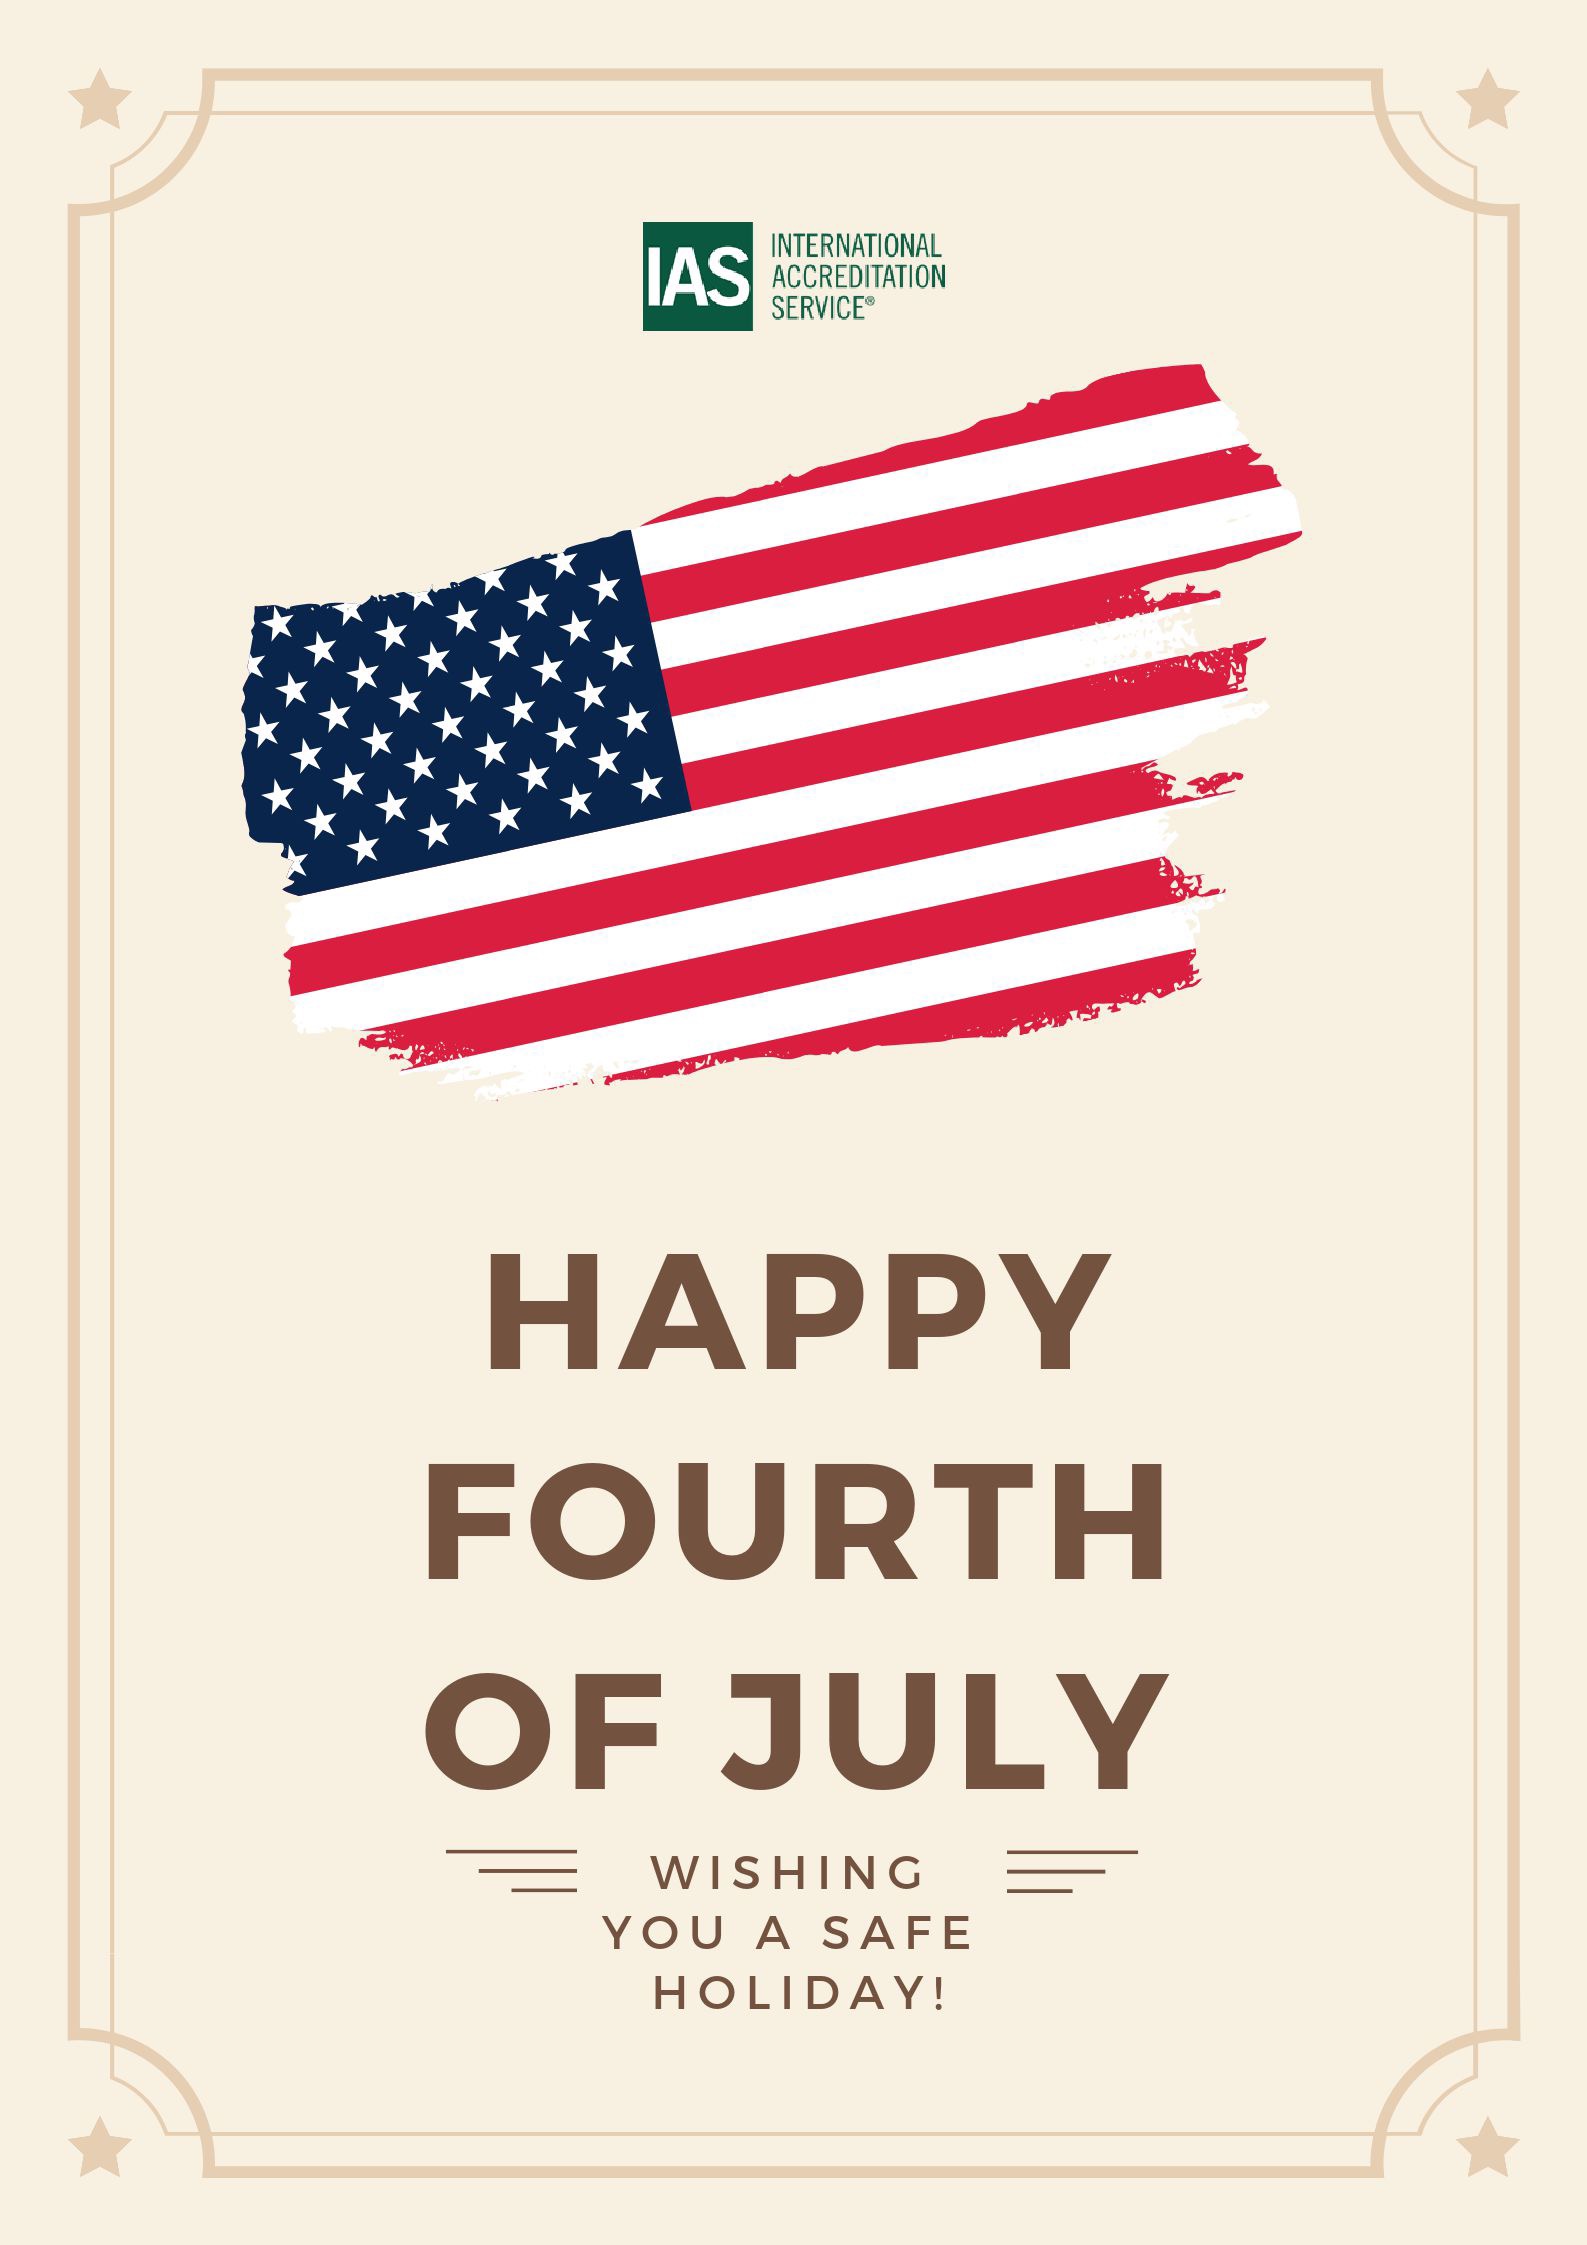 Fourth of July Holiday Wishes and Closure Notice International